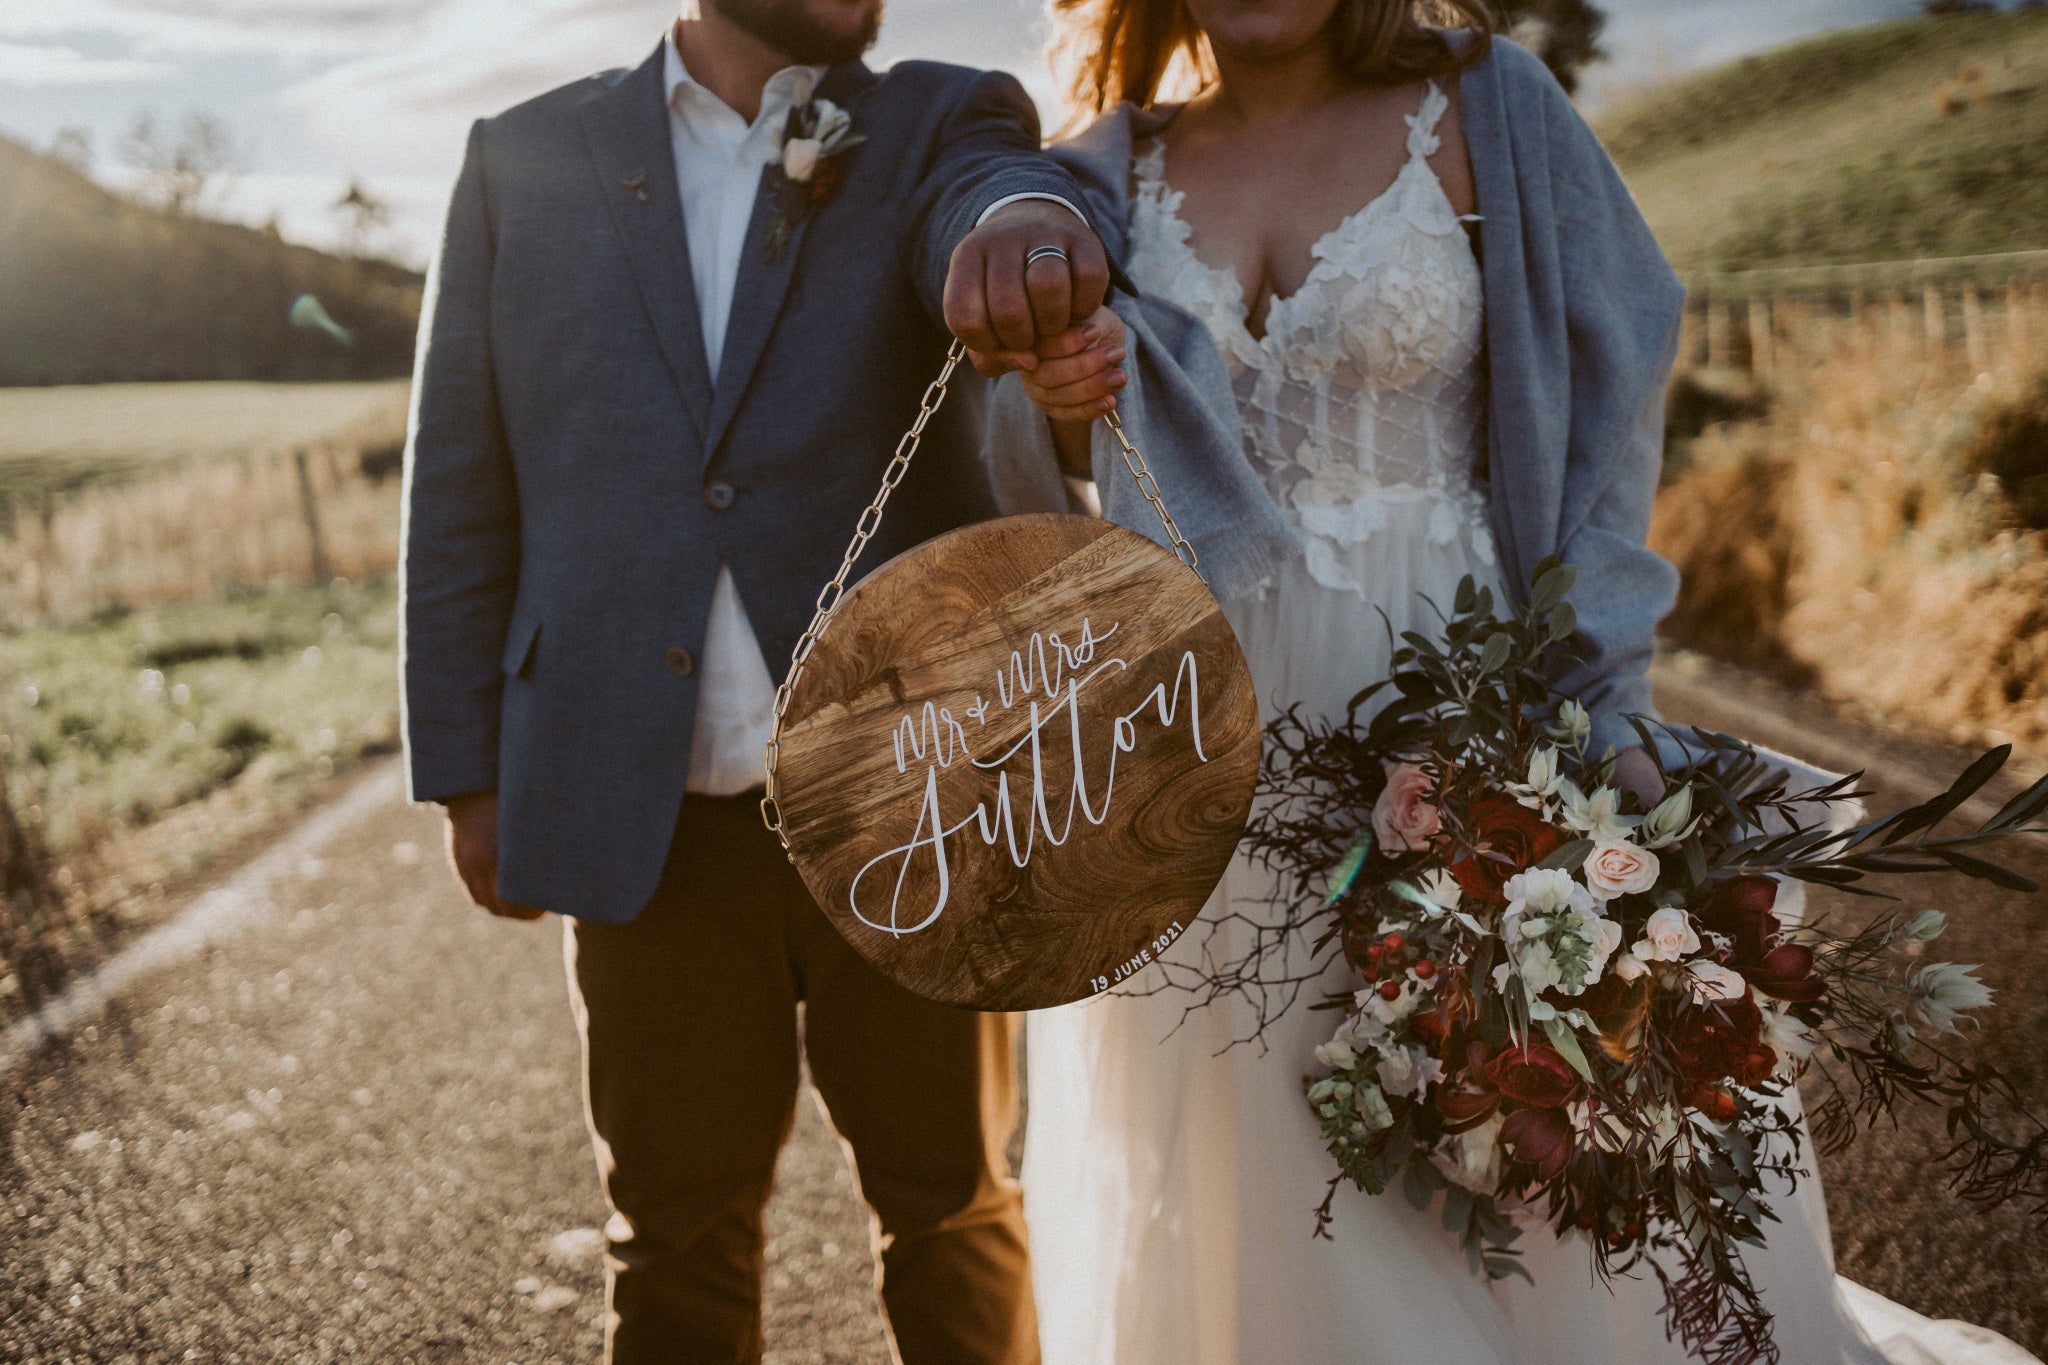 Lily + Josh | Newlywed wood name plaque sign | The Paper Gazelle Wedding Feature